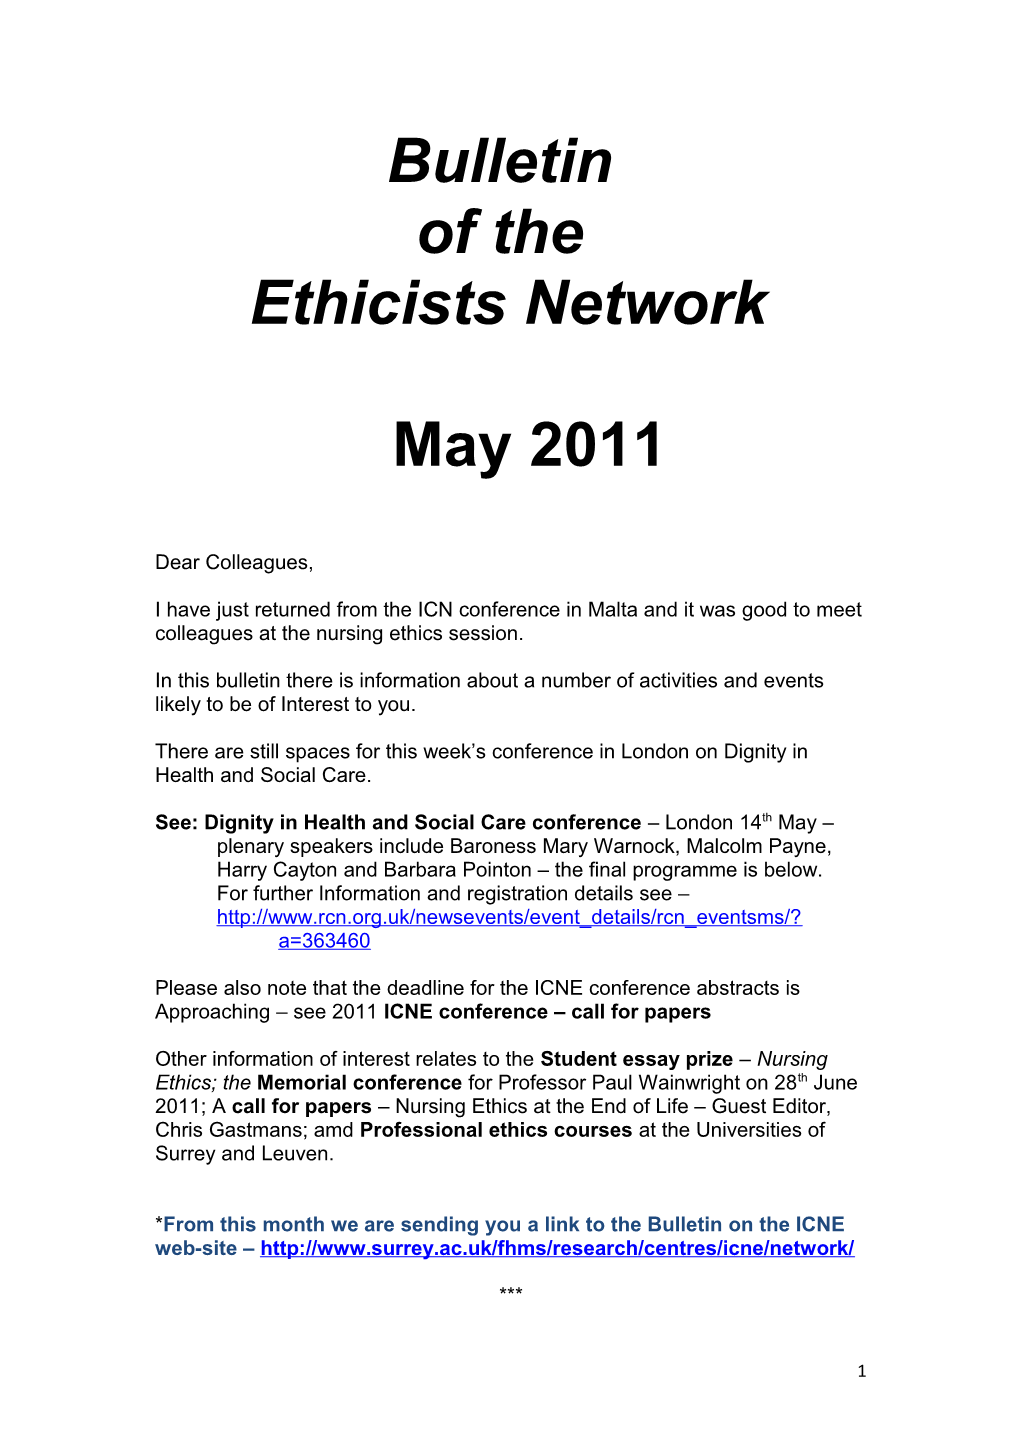 Ethicists Network